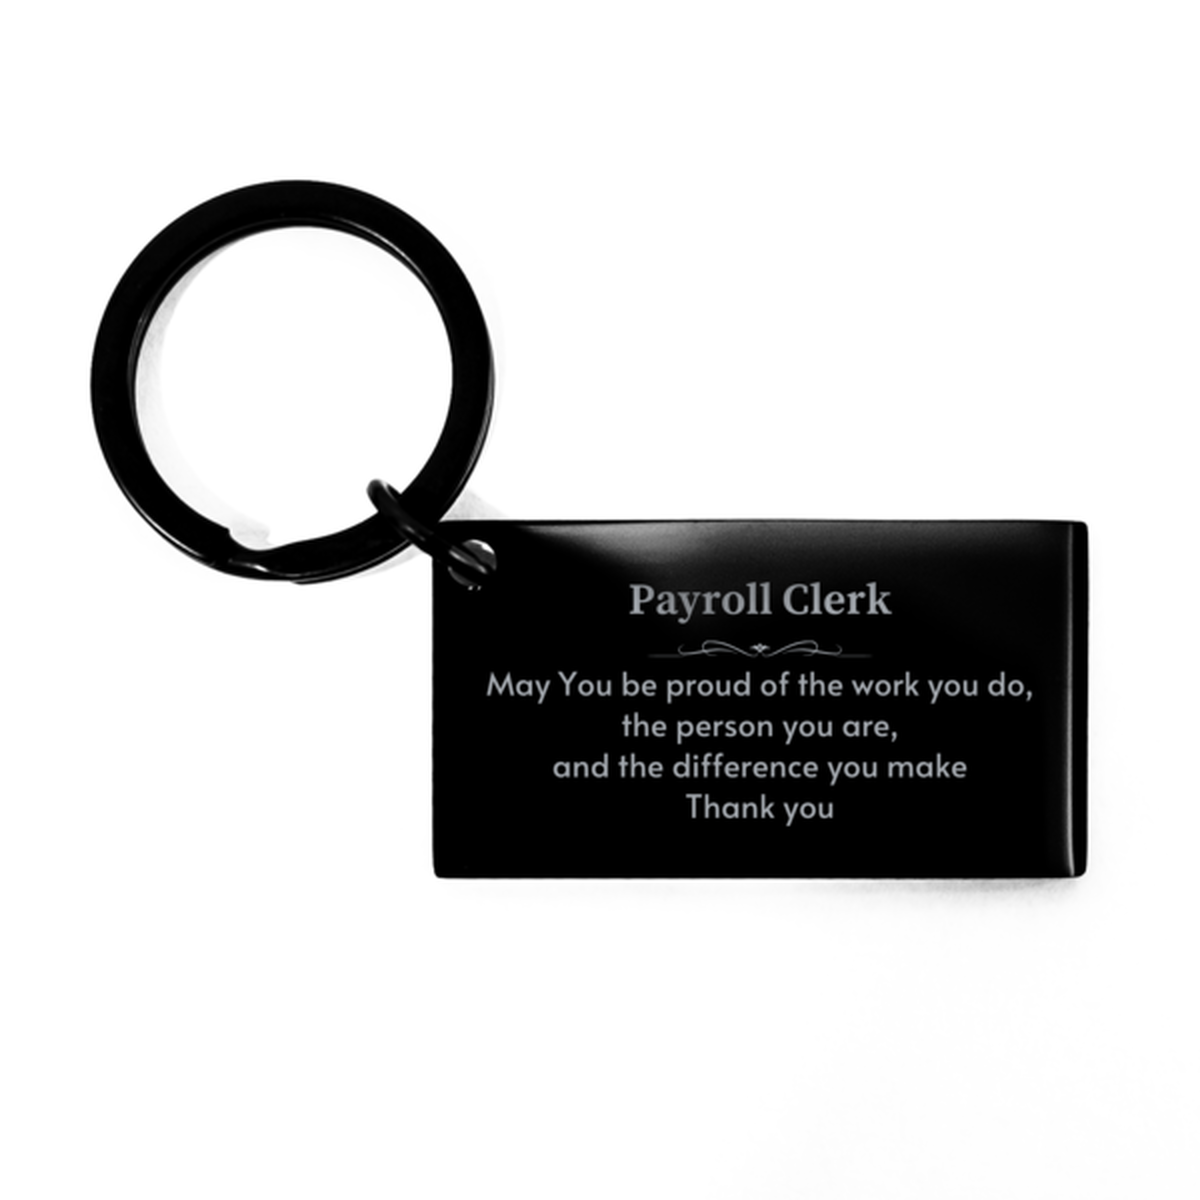 Heartwarming Keychain Retirement Coworkers Gifts for Payroll Clerk, Radiation Therapist May You be proud of the work you do, the person you are Gifts for Boss Men Women Friends